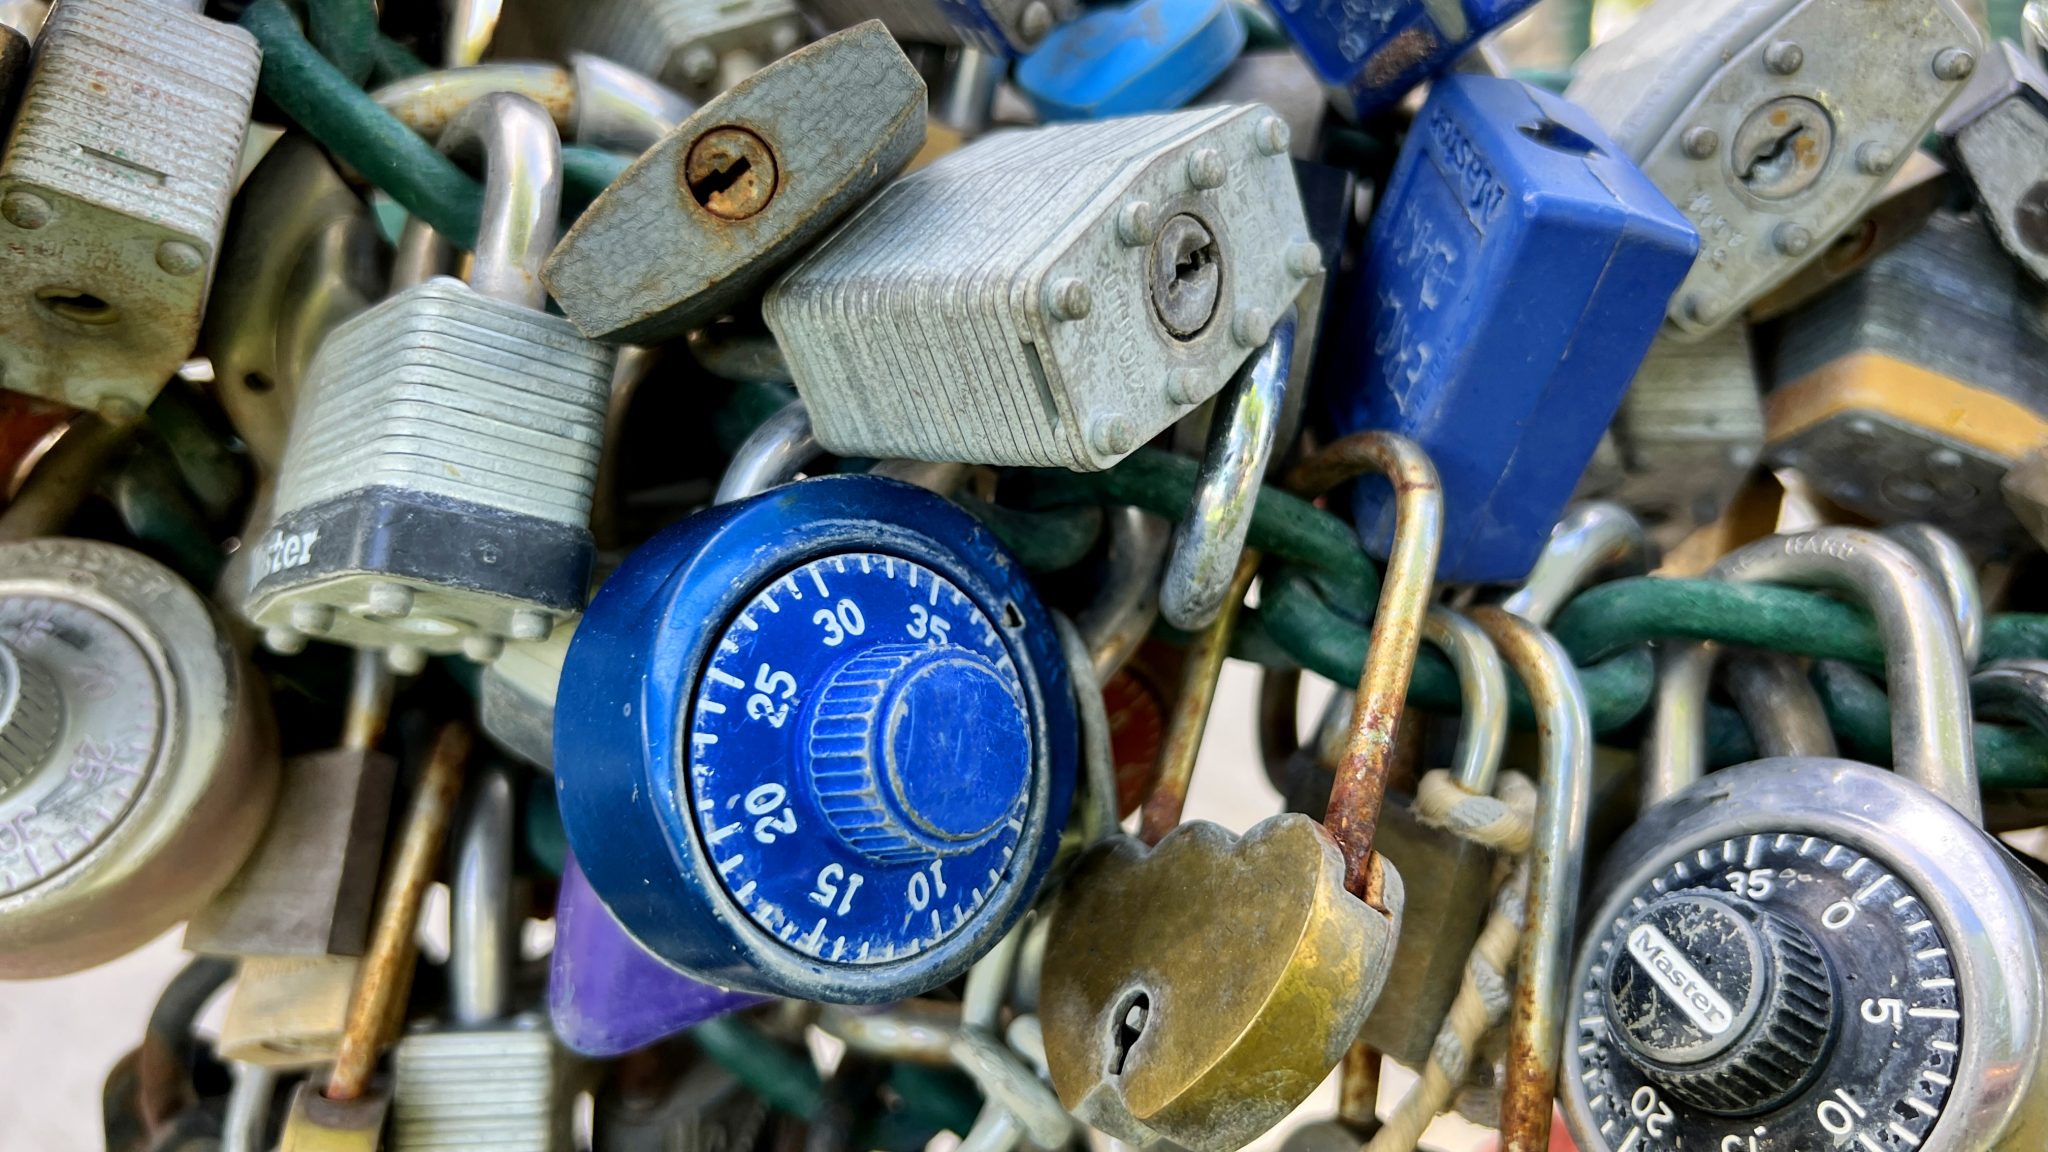 Collection of Security Locks